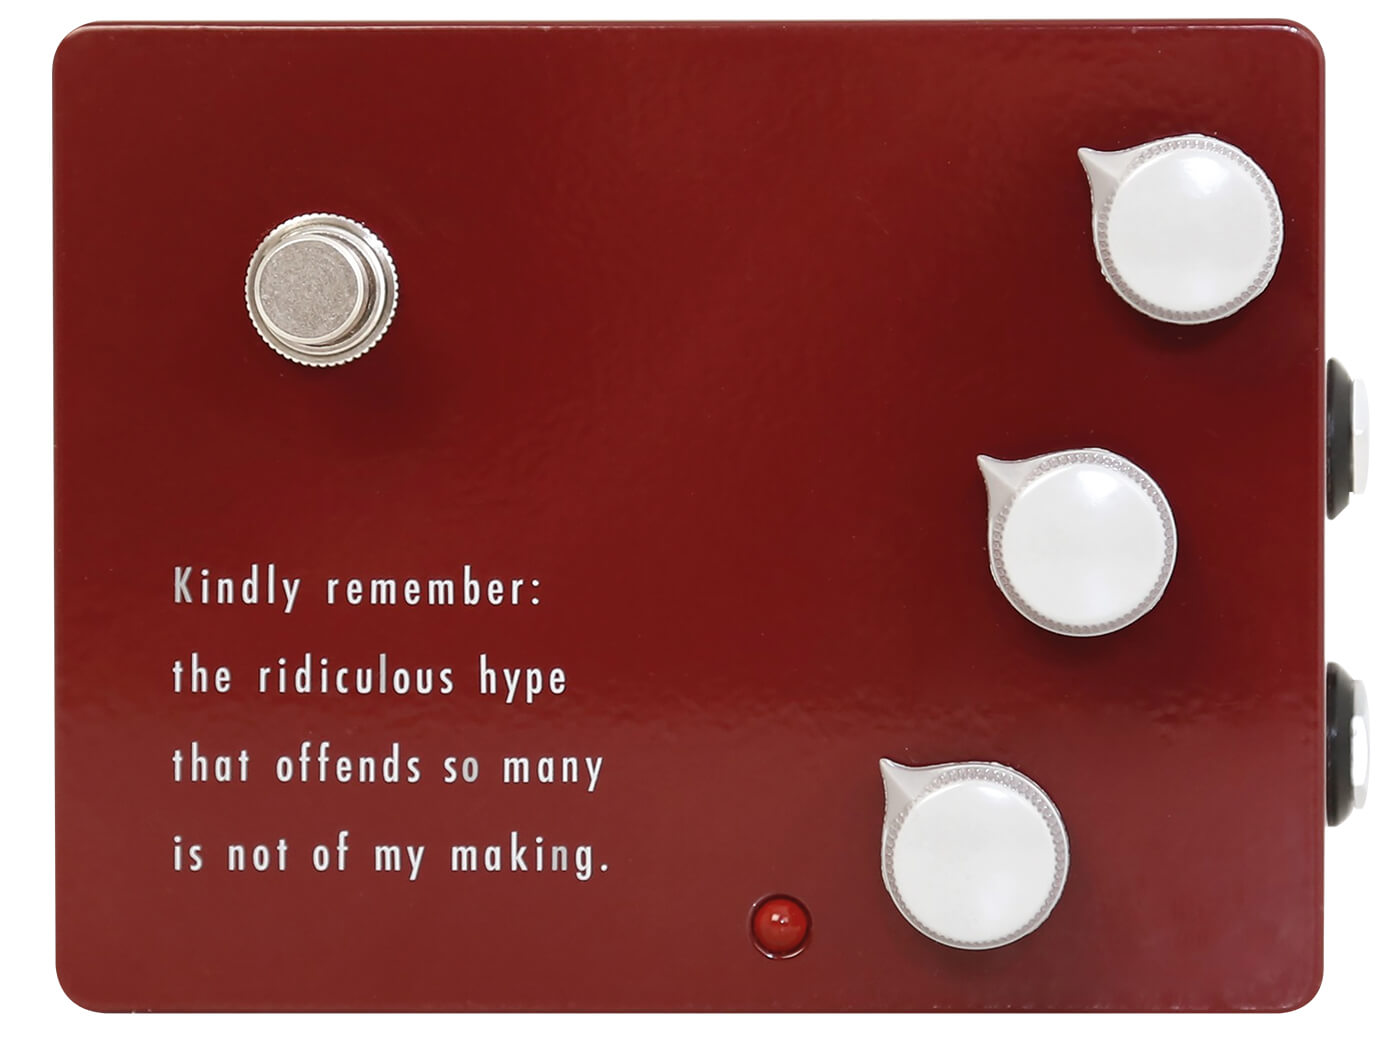 Klon's supply of legendary NOS diodes dwindles, KTR overdrive to 